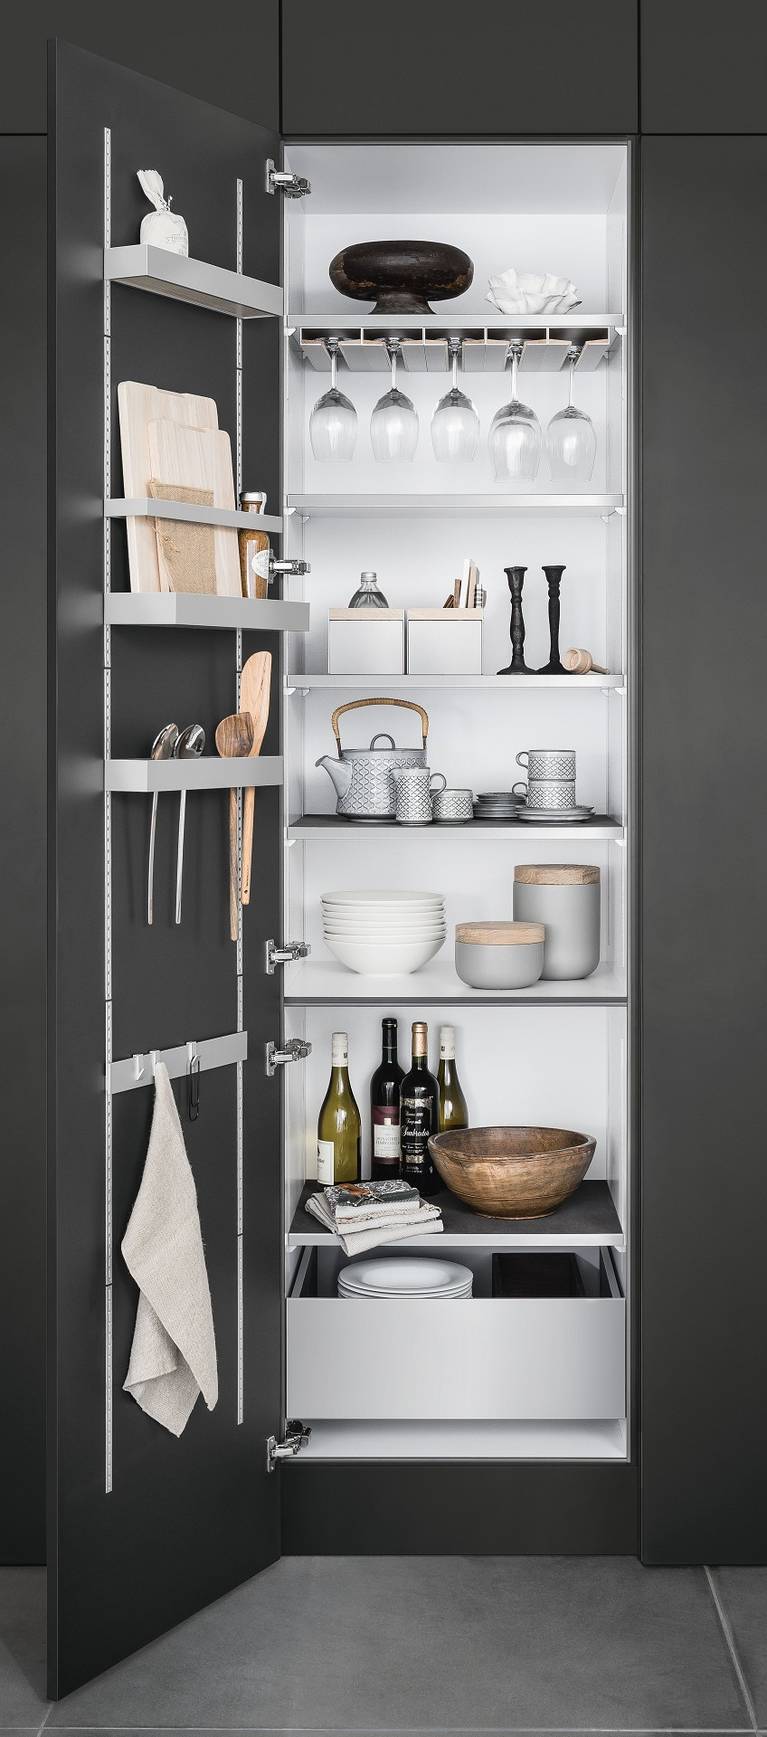 SieMatic MultiMatic interior organization system for cabinets offers up to 30% more storage space in the kitchen